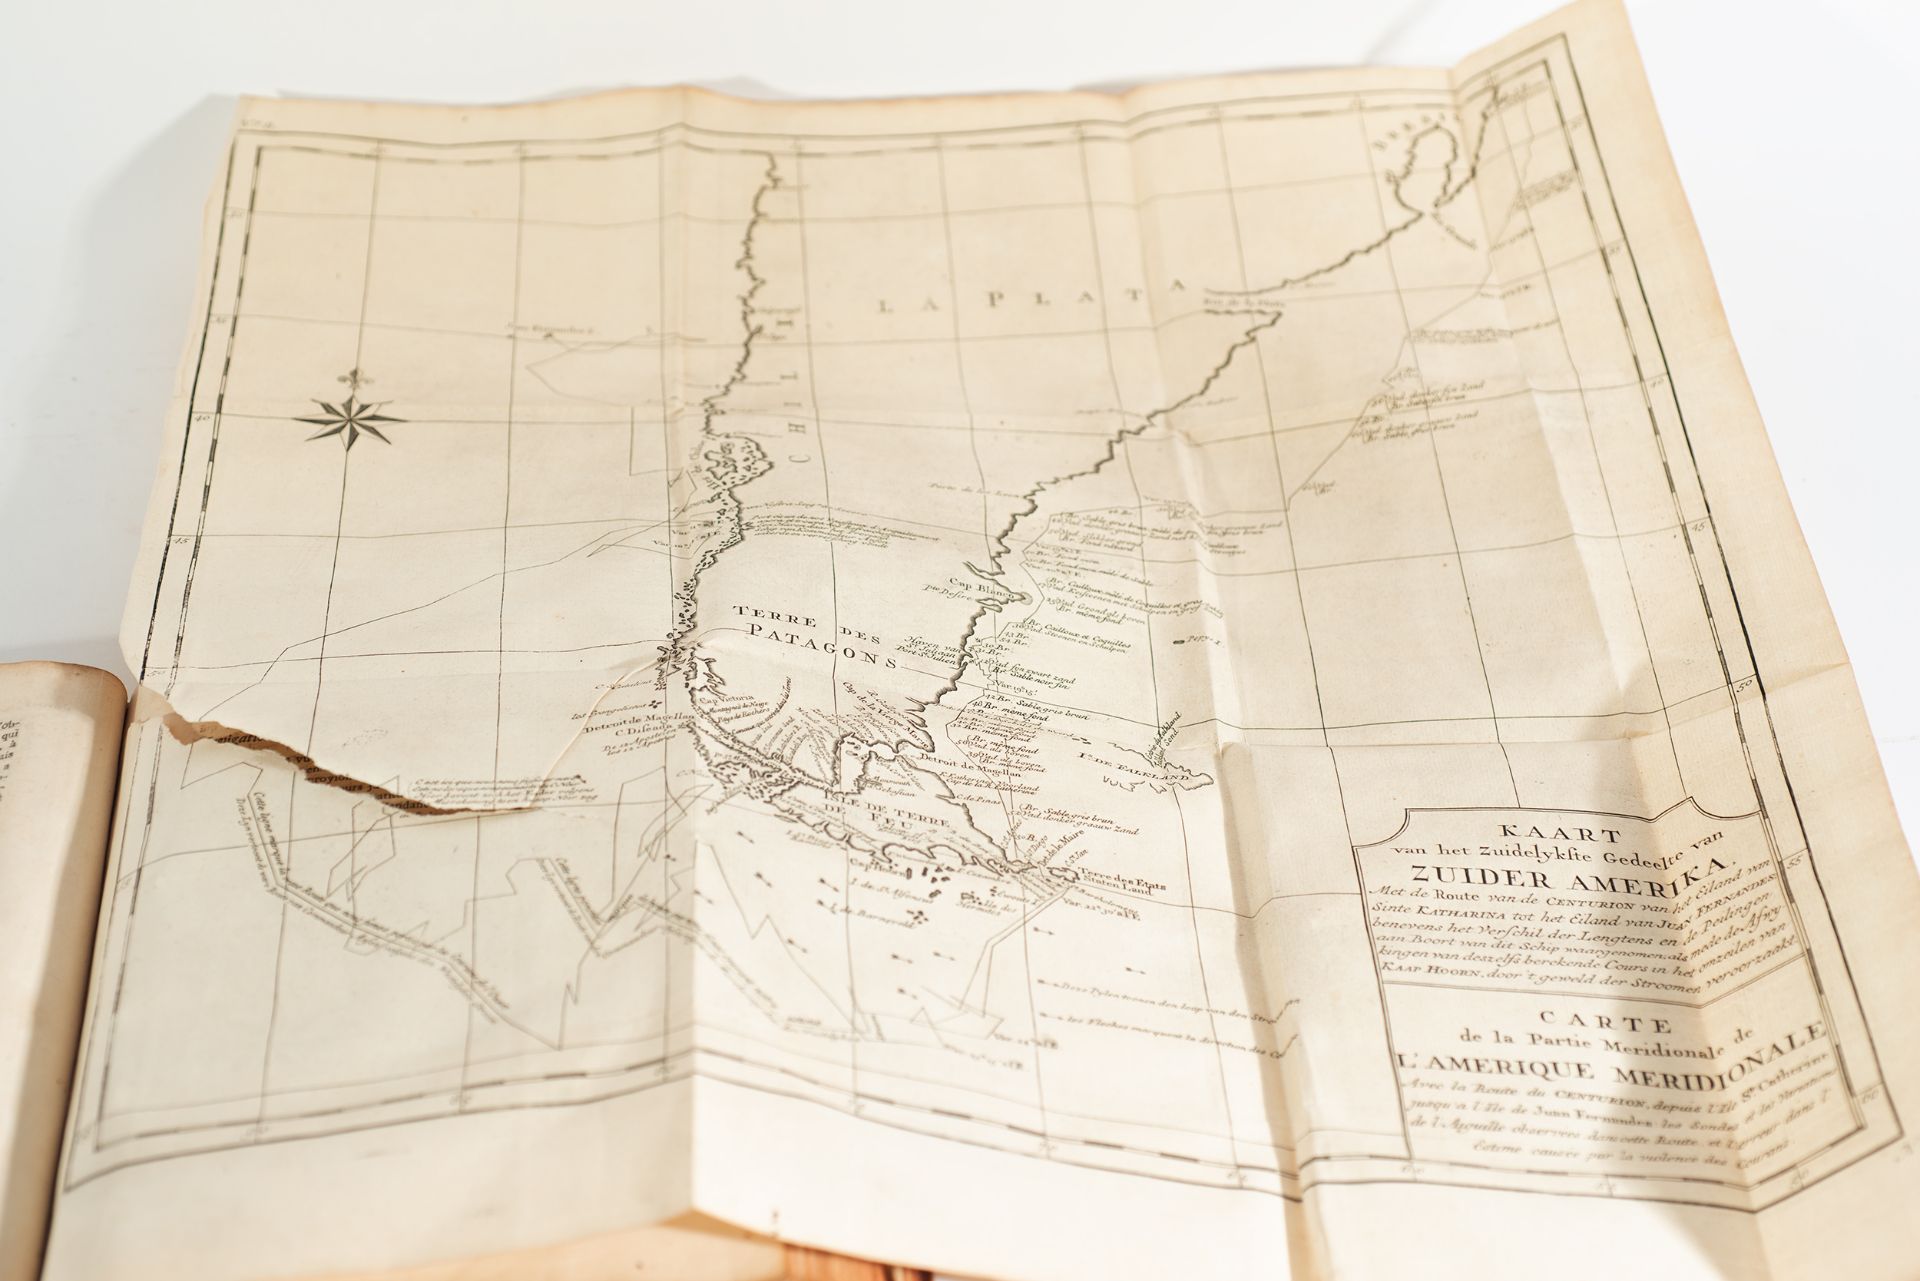 Lord Anson's Voyage Around the World, translated from English, edited 1749 - Image 5 of 12